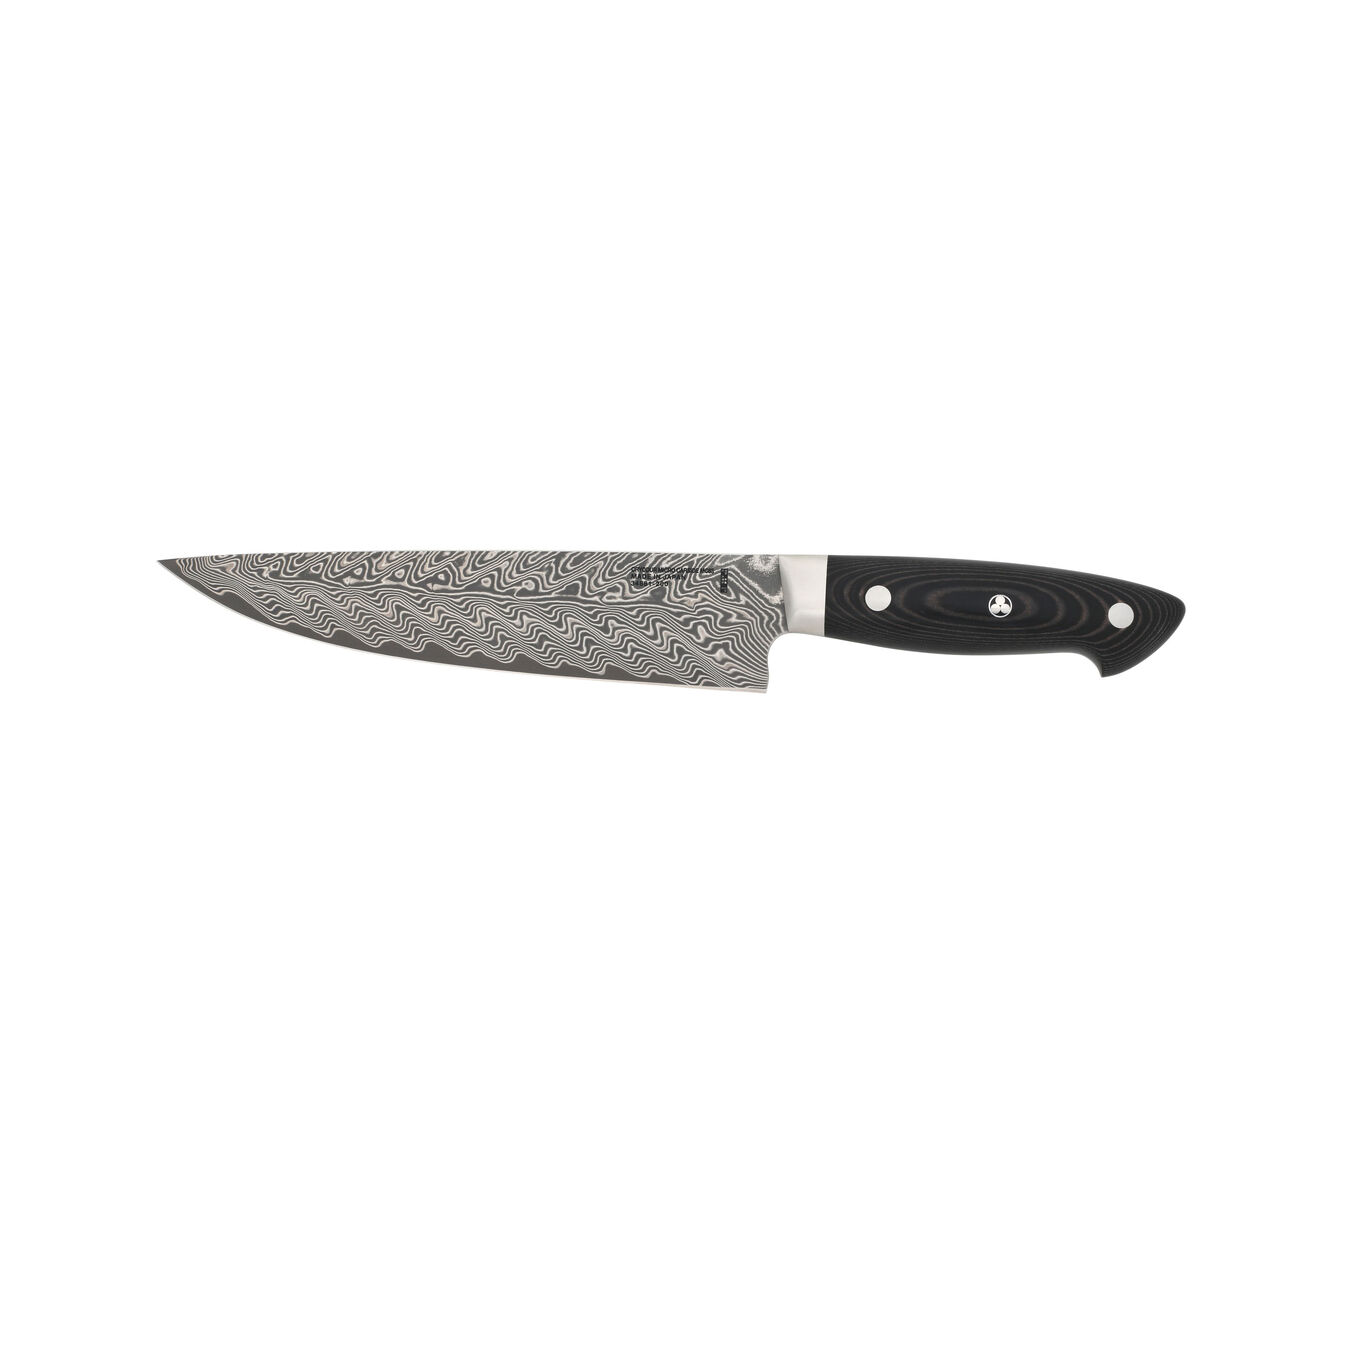 8-inch, Narrow Chef's Knife,,large 4